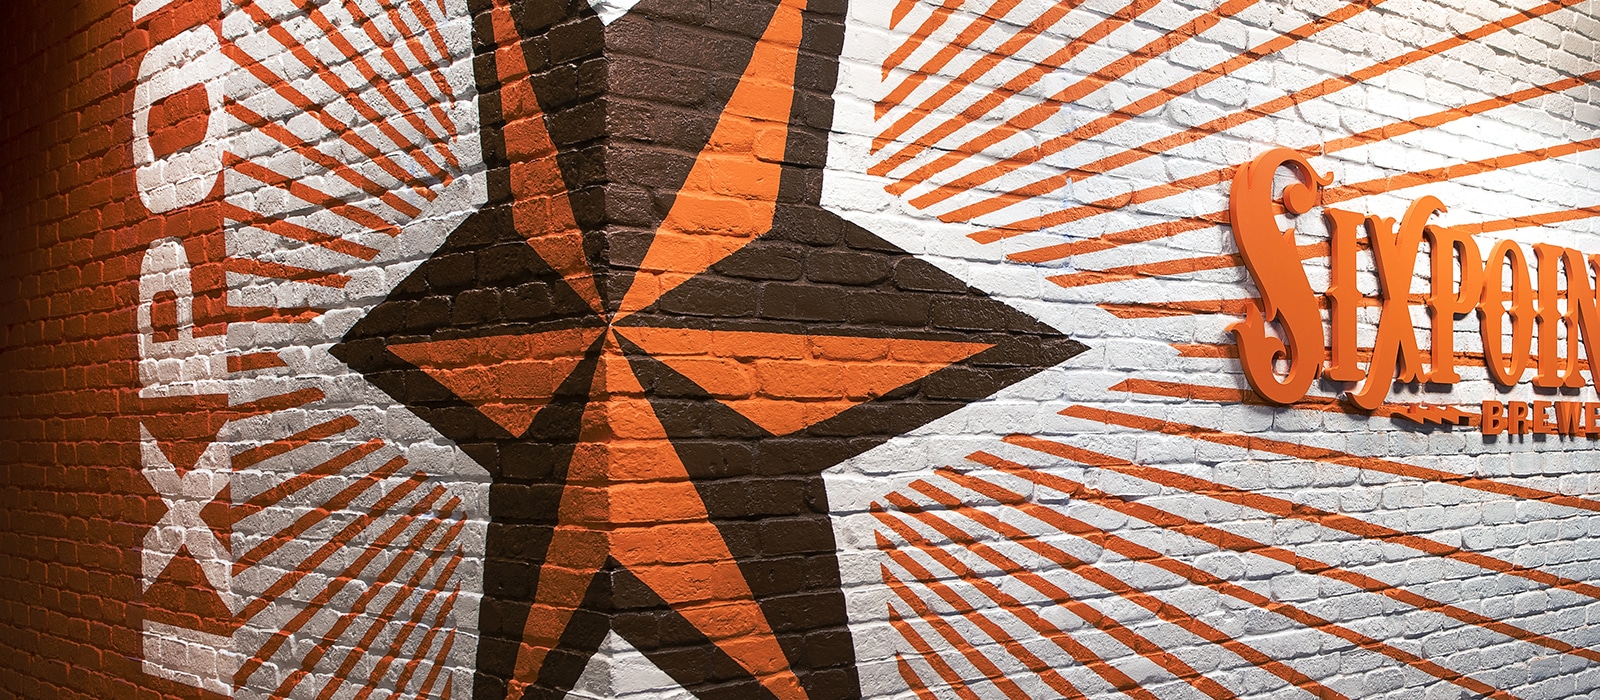 Sixpoint Brewery, six point star on brick wall.